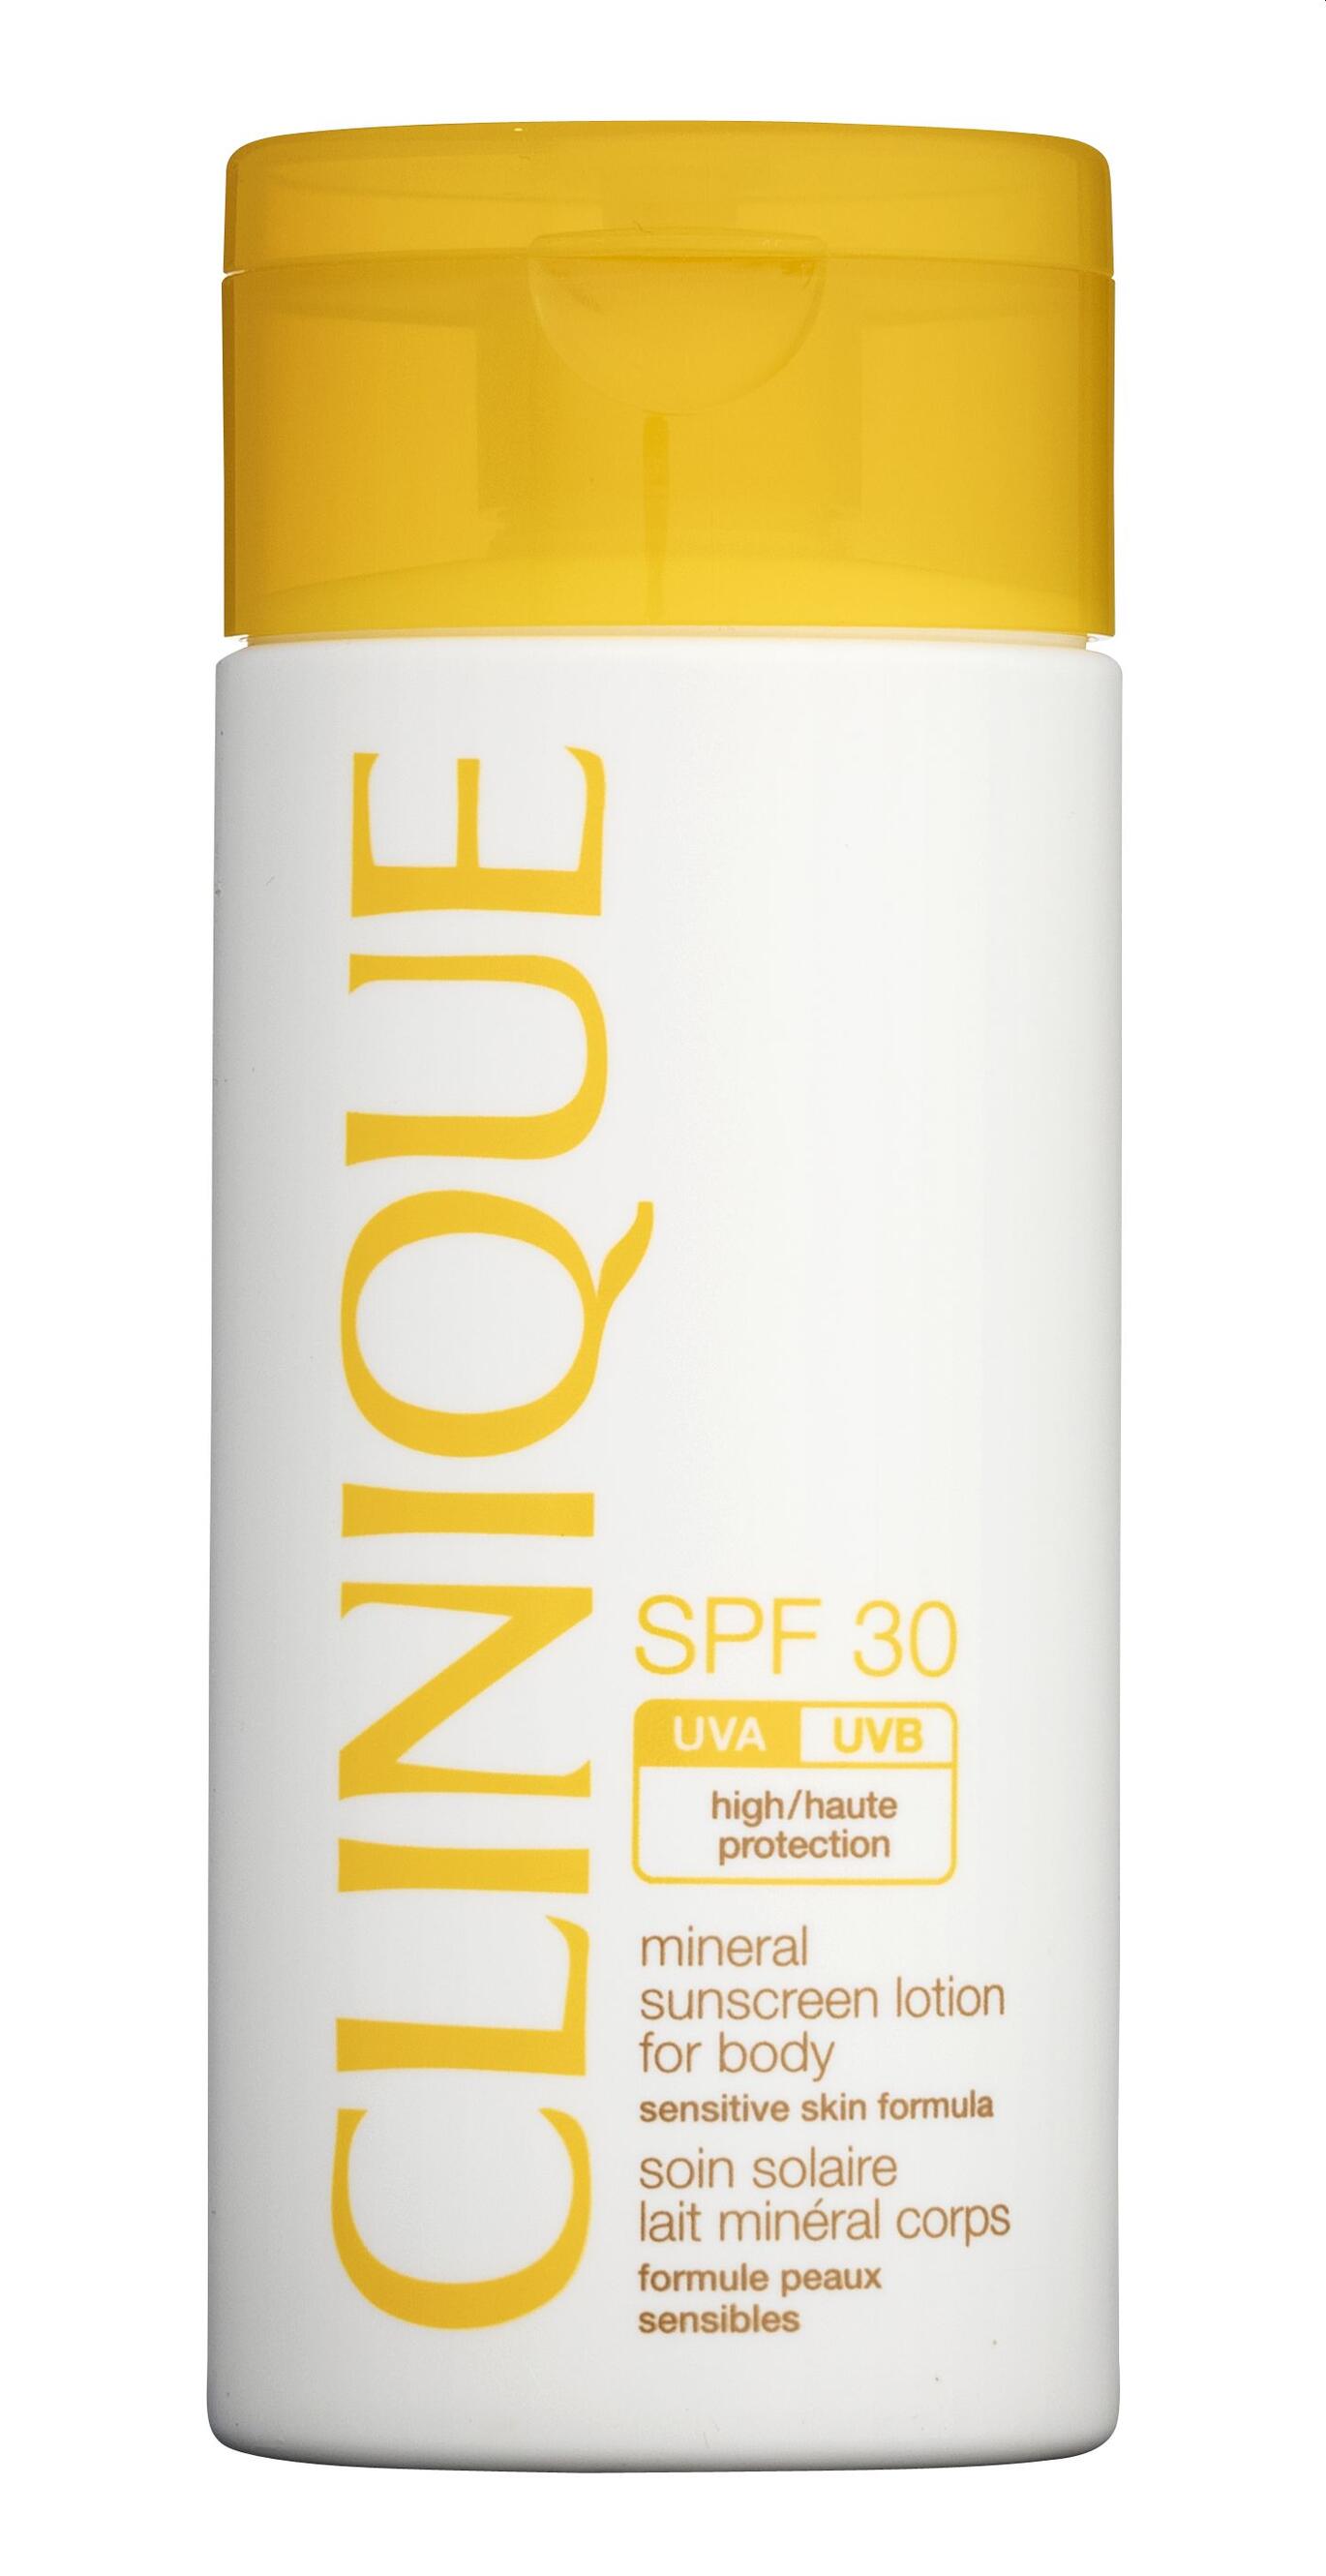 Mineral Sunscreen Lotion for body SPF 30 Clinique